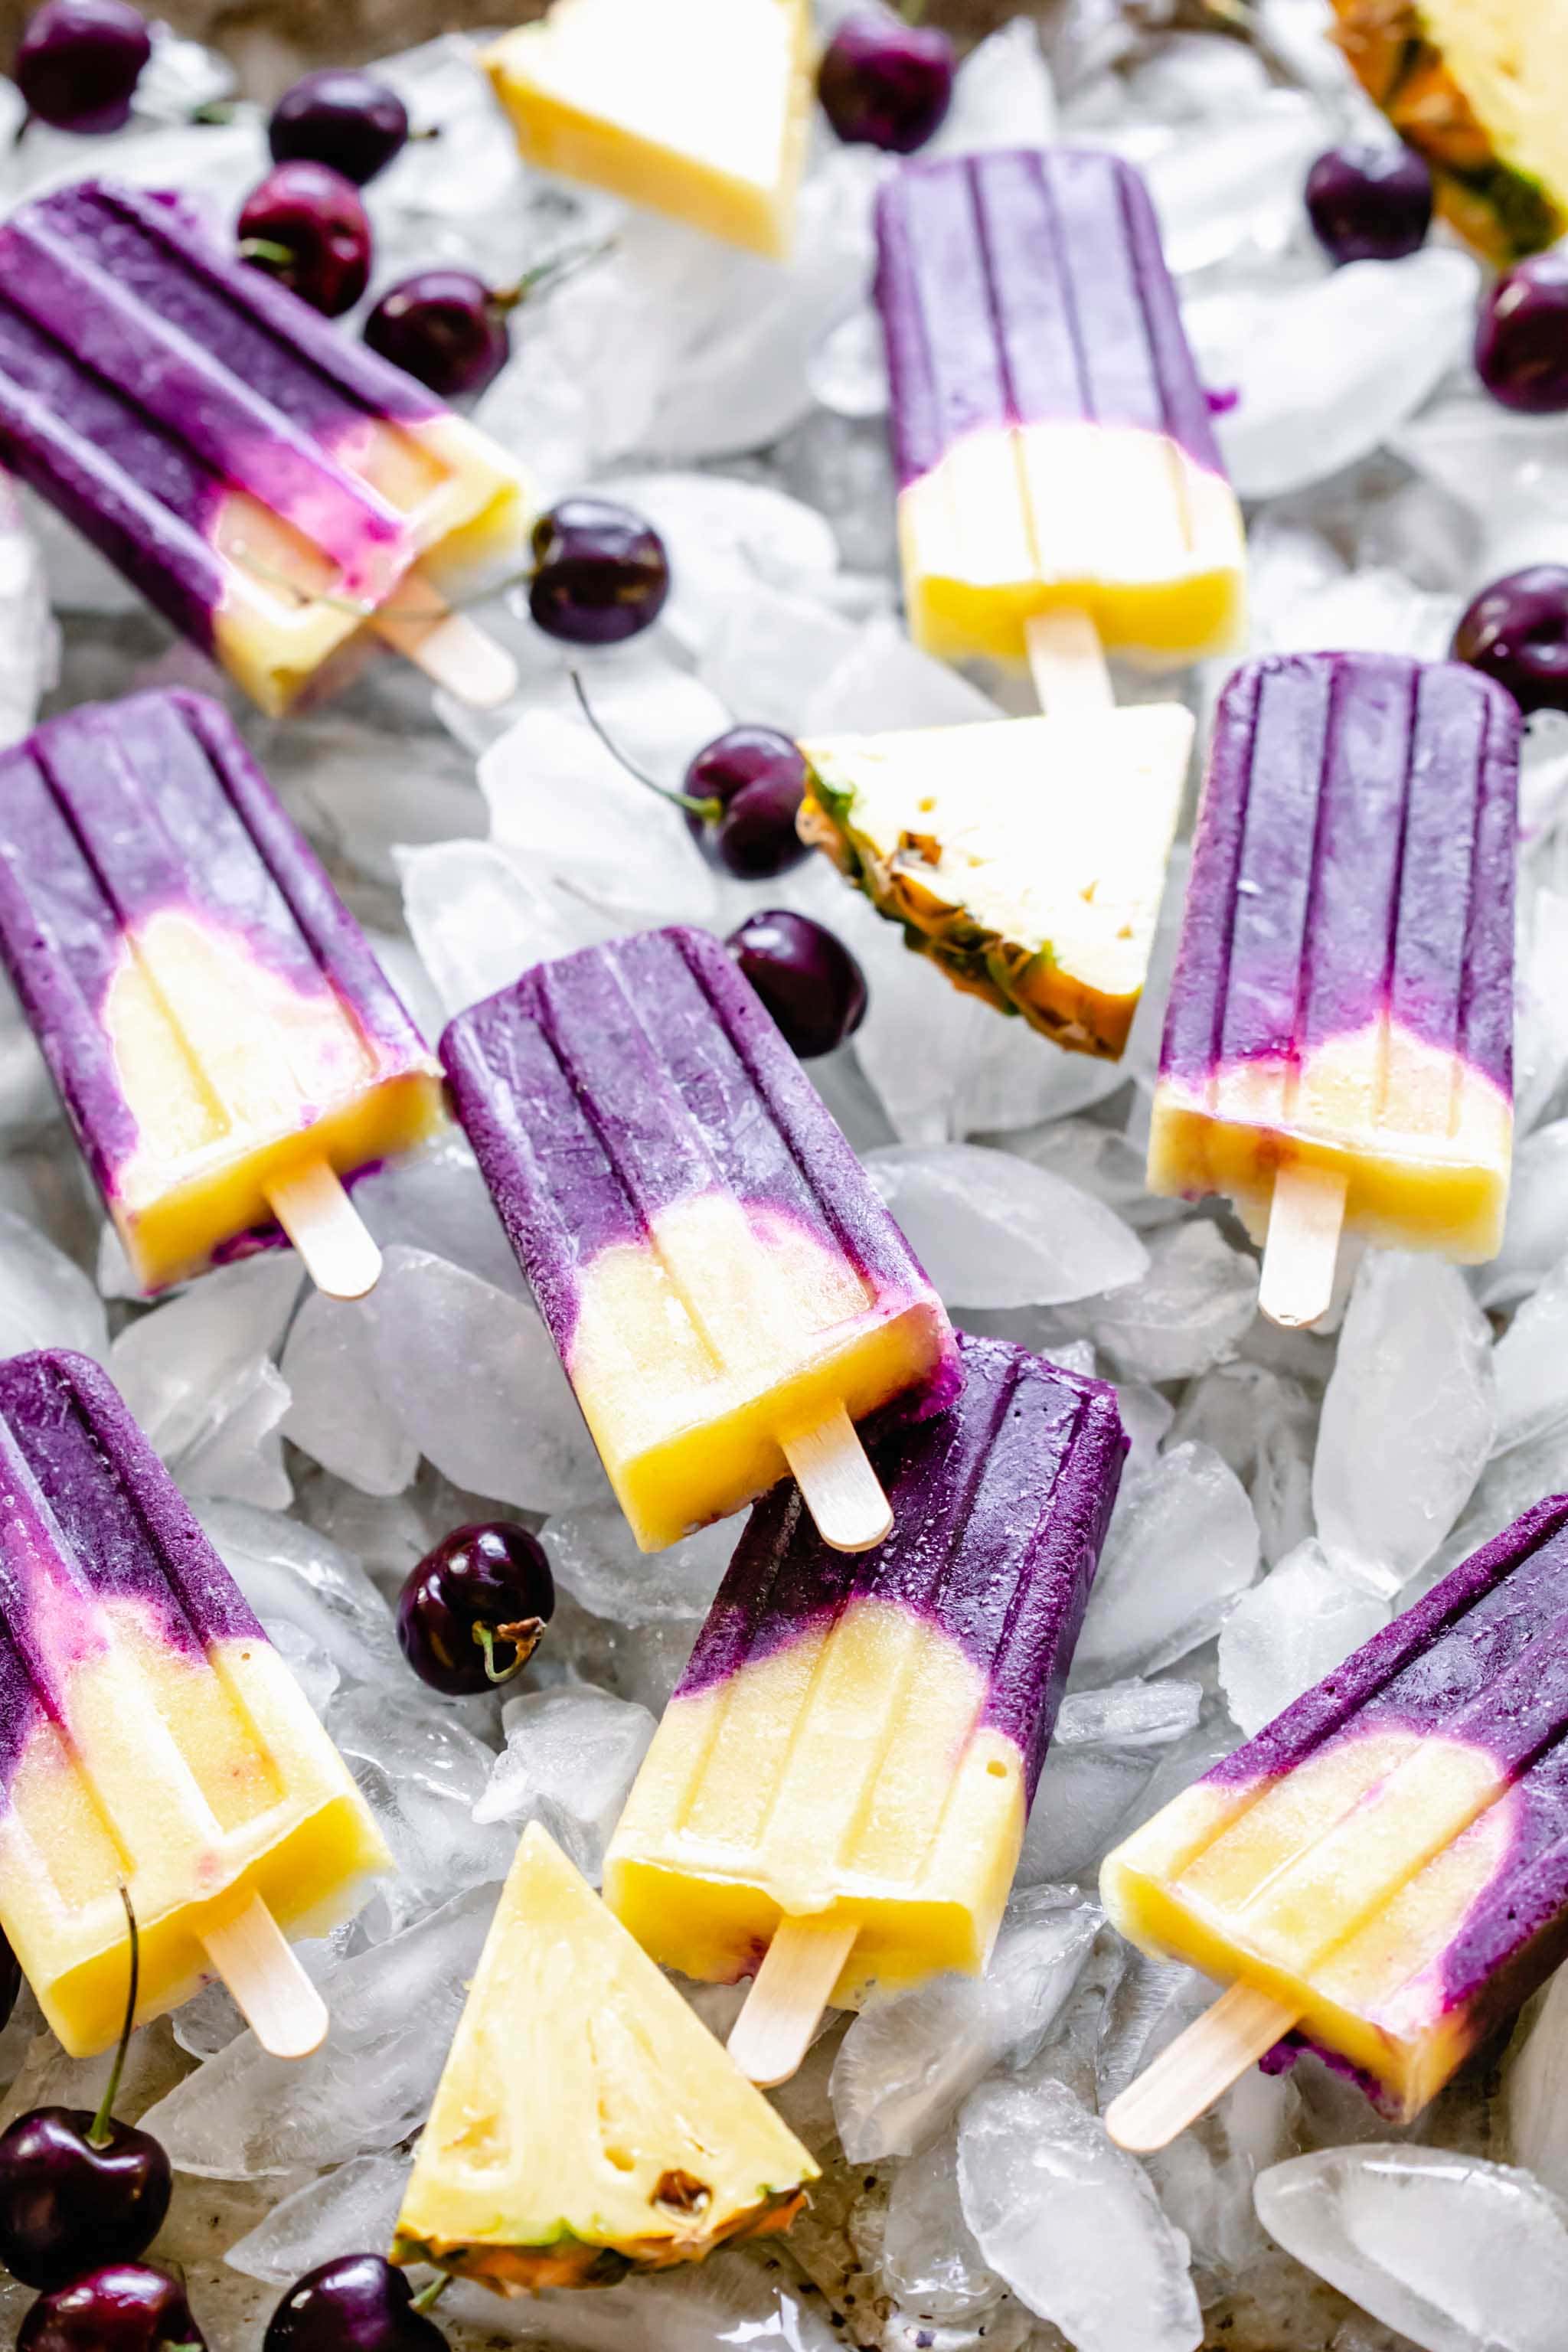 Cherry pineapple popsicles on tray of ice cubes with pineapple wedges and cherries scattered about.